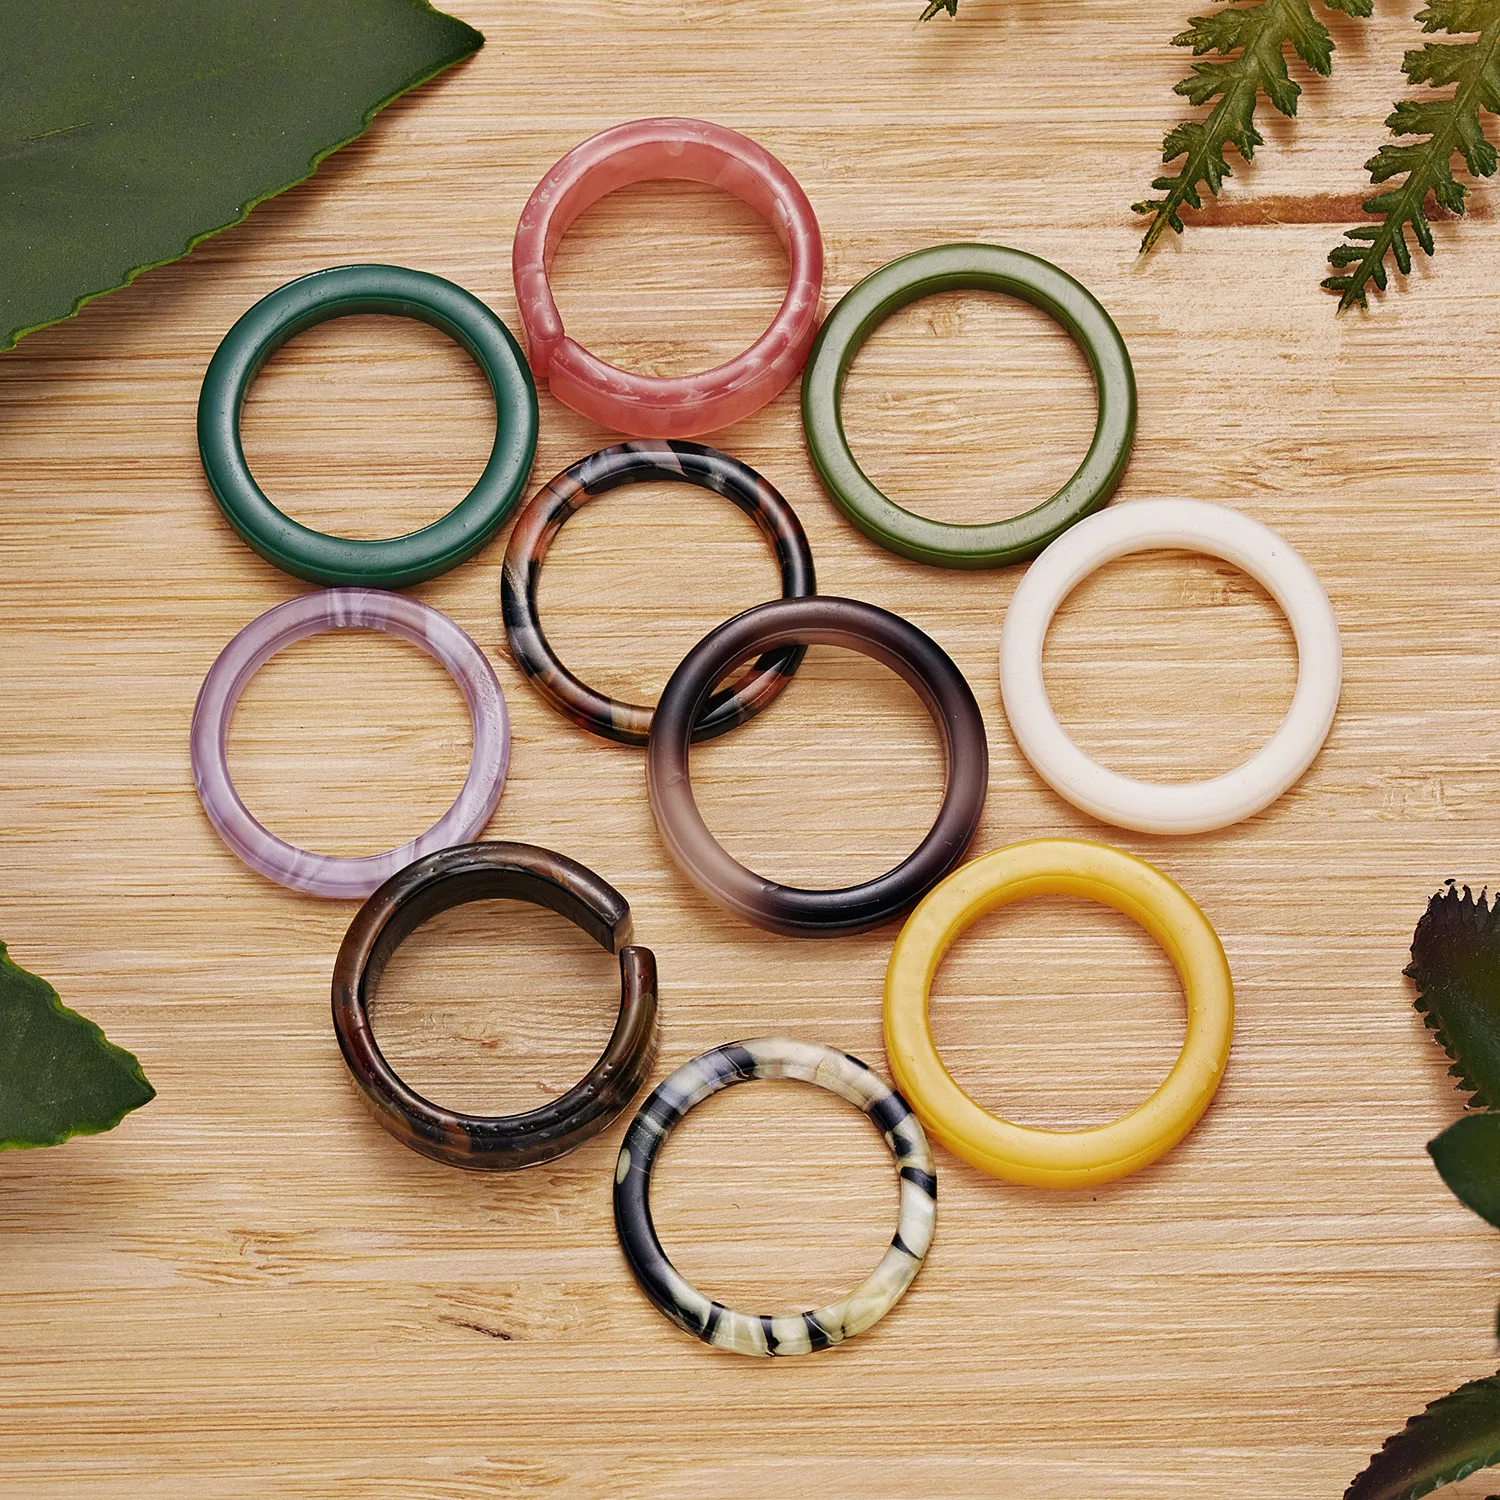 New Korea Aesthetic Colourful Resin Acrylic Rings Set for Women Geometric Round Rings Girl Temperament Versatile Jewelry Gifts